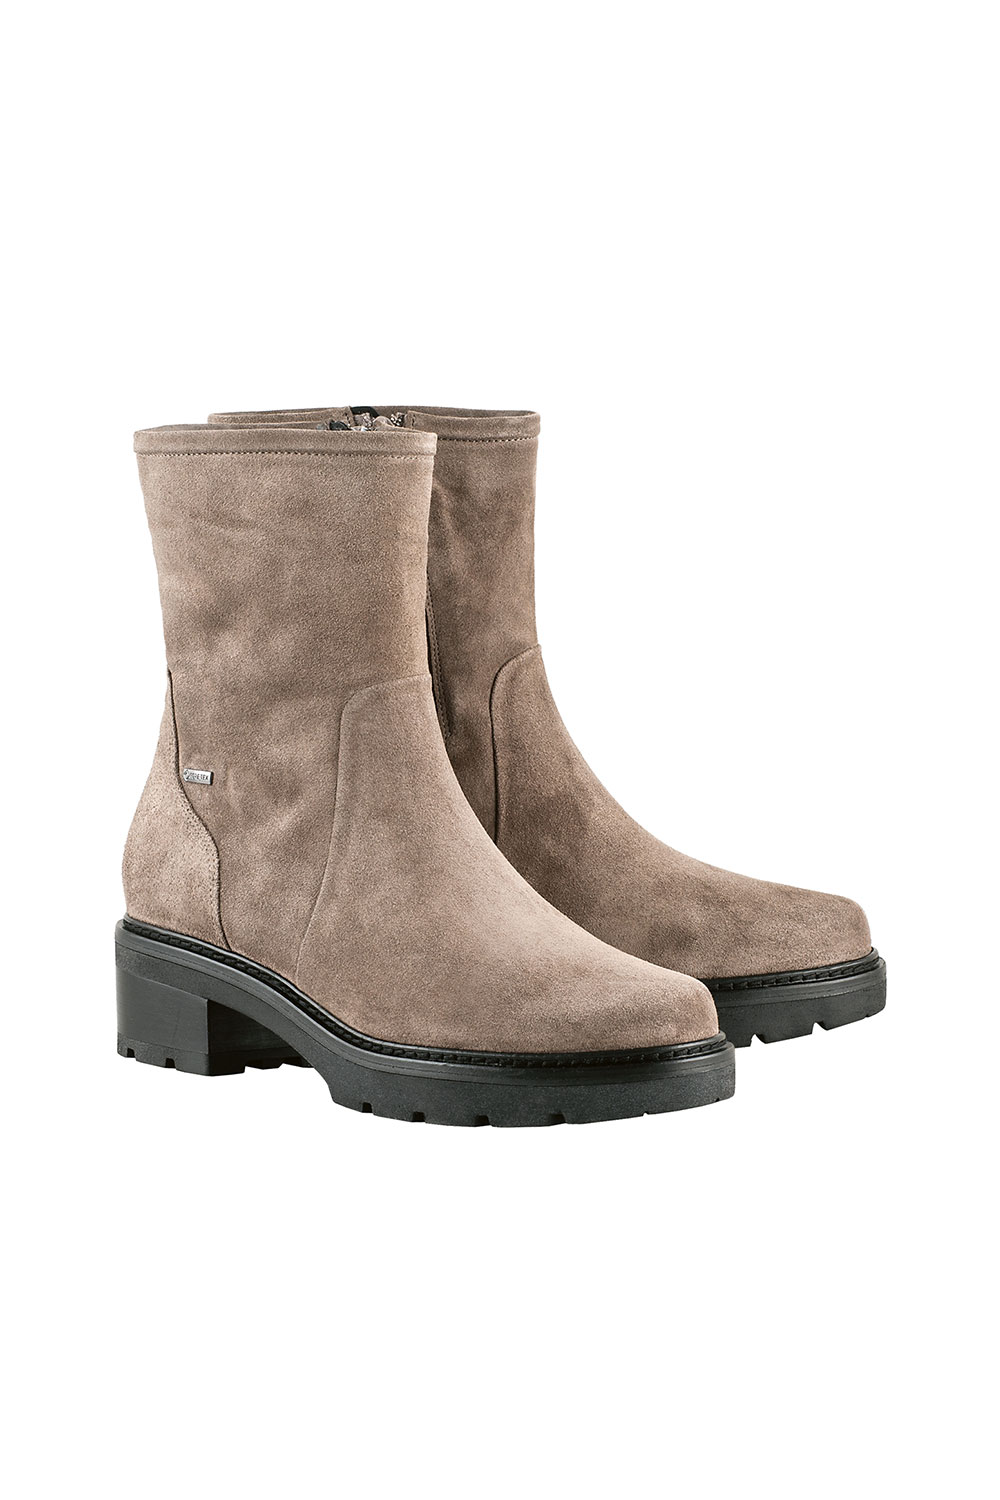 Hogl Pair taupe gortex ankle boot